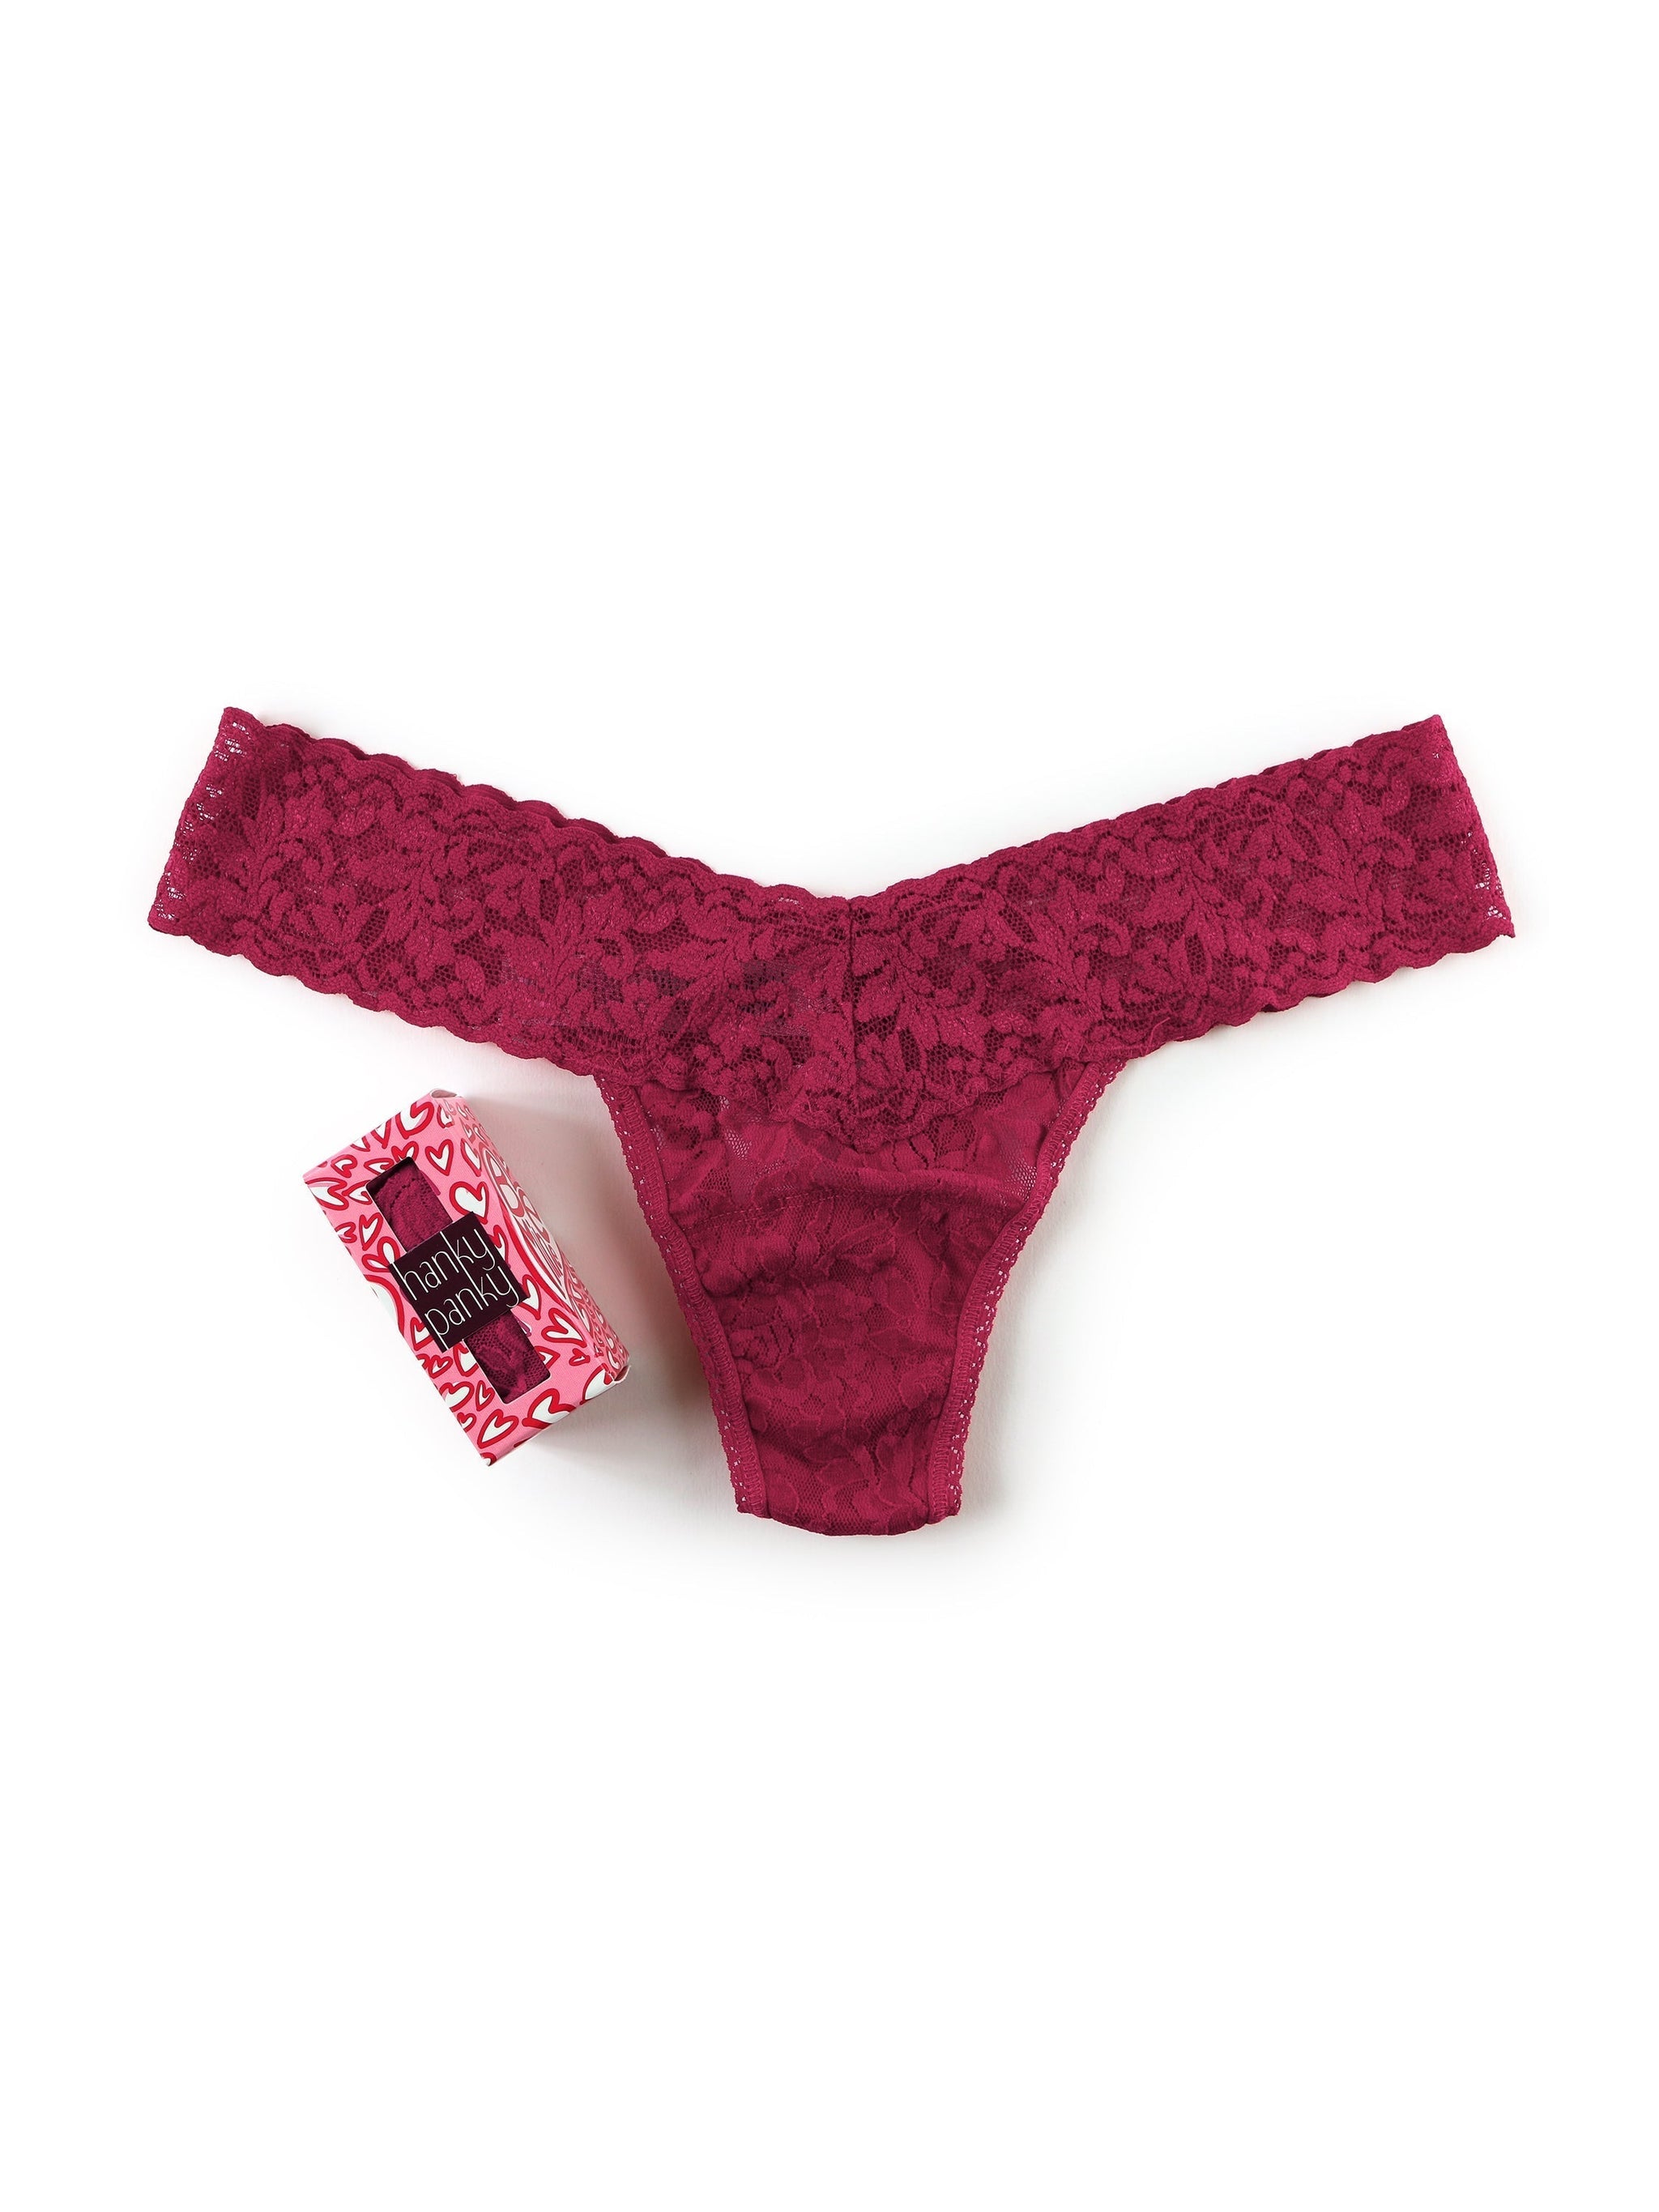 Valentines Day Sexy Thong Panties Womens Low Rise Lace Panties